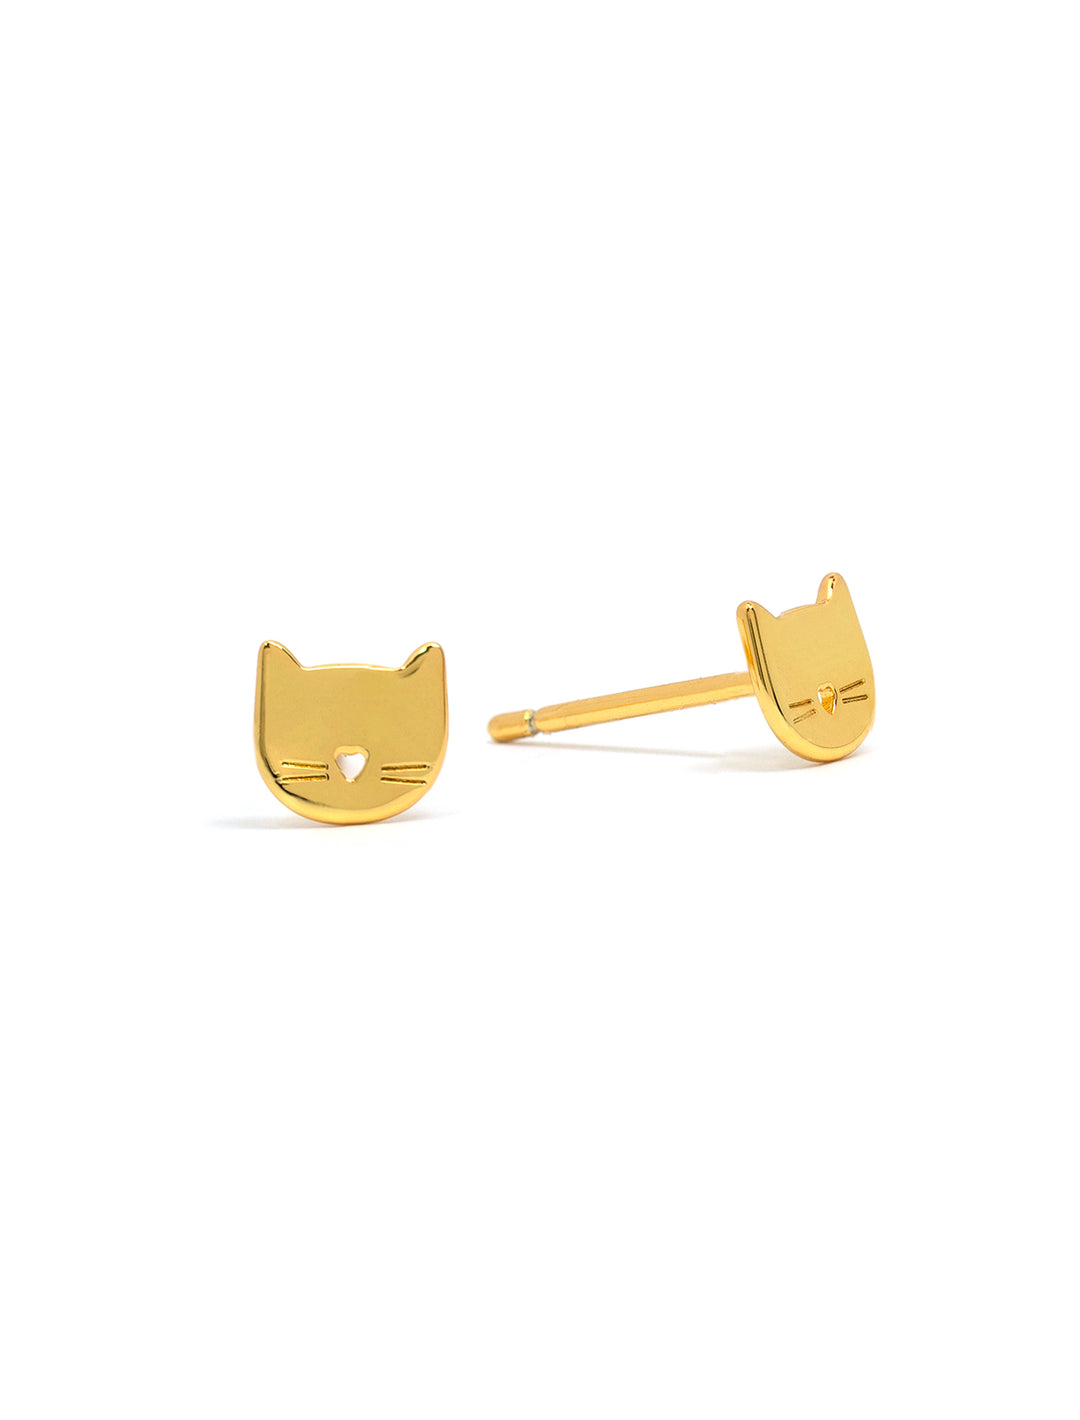 Front view of Tai's cat studs in gold.